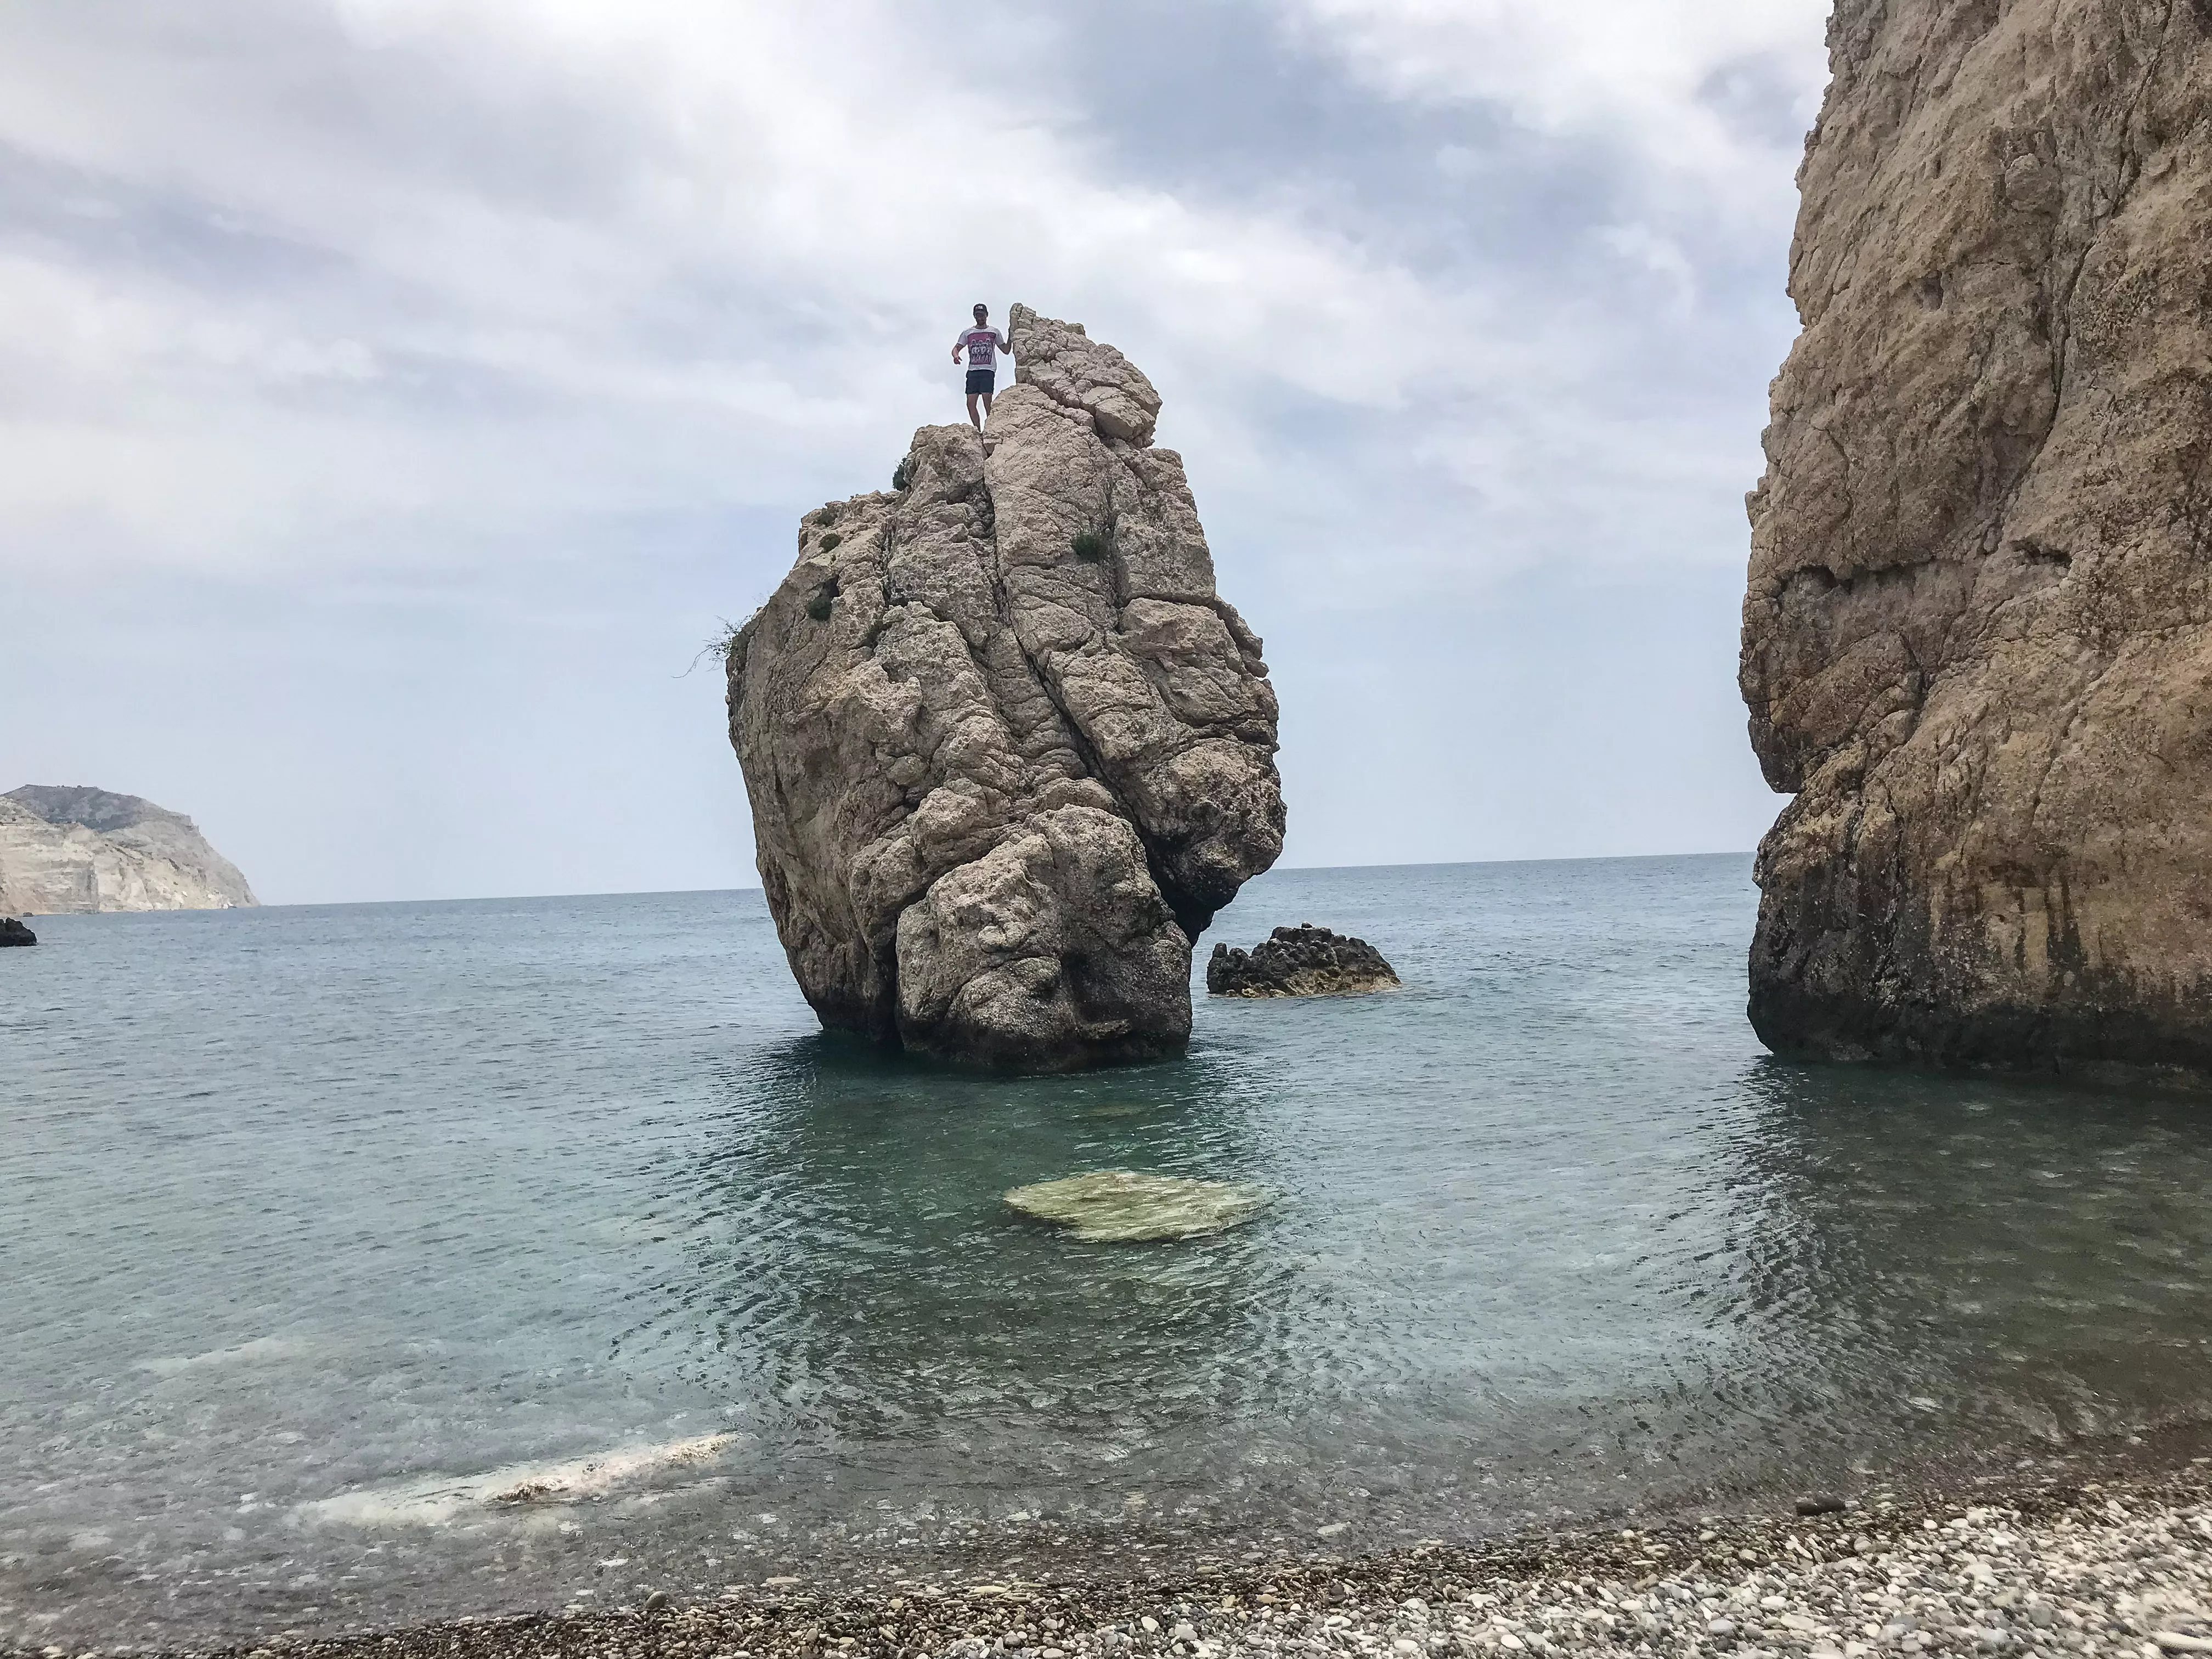 Aphrodite’s Rock in Cyprus, Europe | Nature Reserves,Trekking & Hiking - Rated 4.2